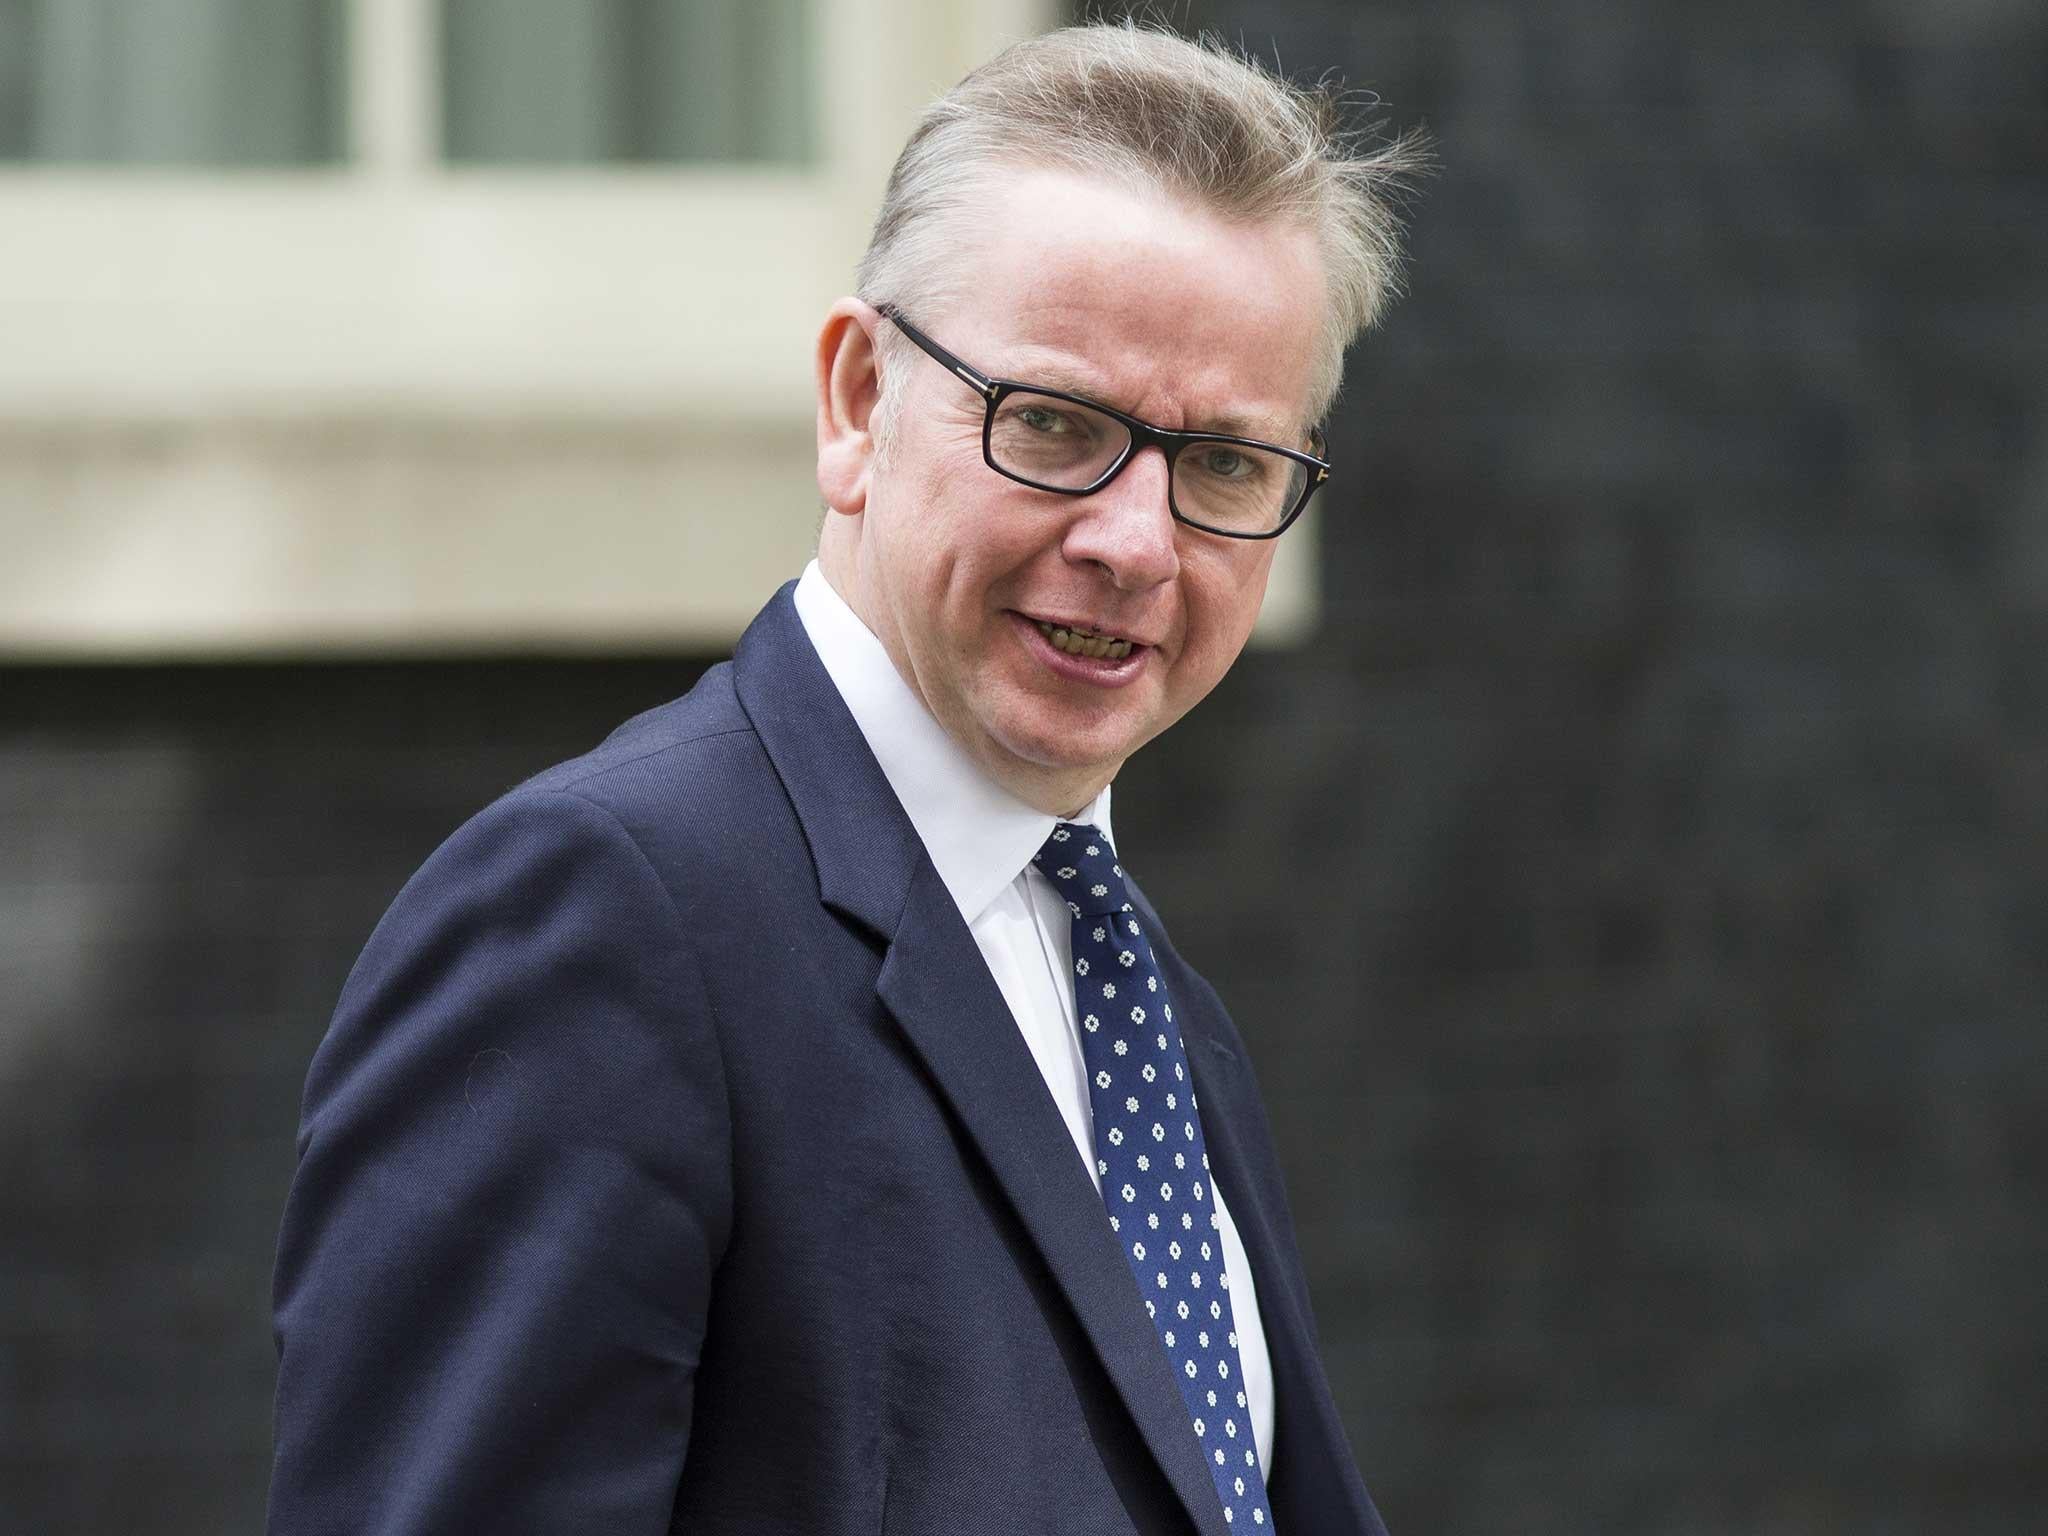 Michael Gove has landed a scoop